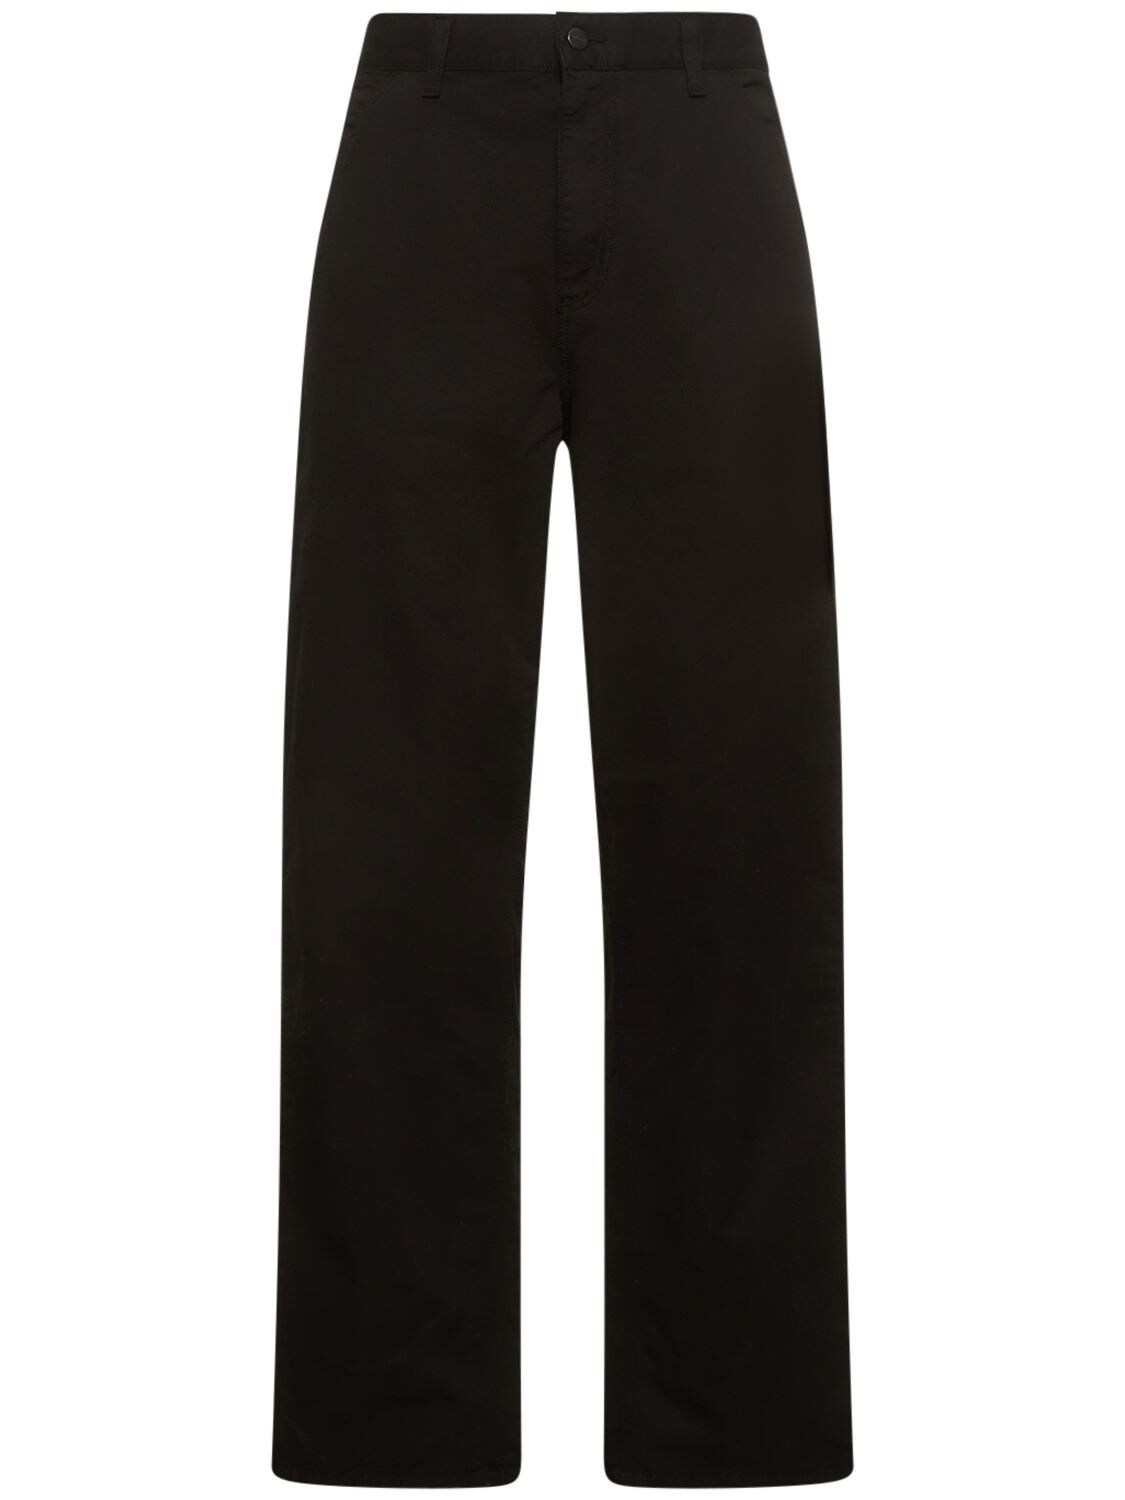 Carhartt Drill Single Knee Pants In Dyed Black